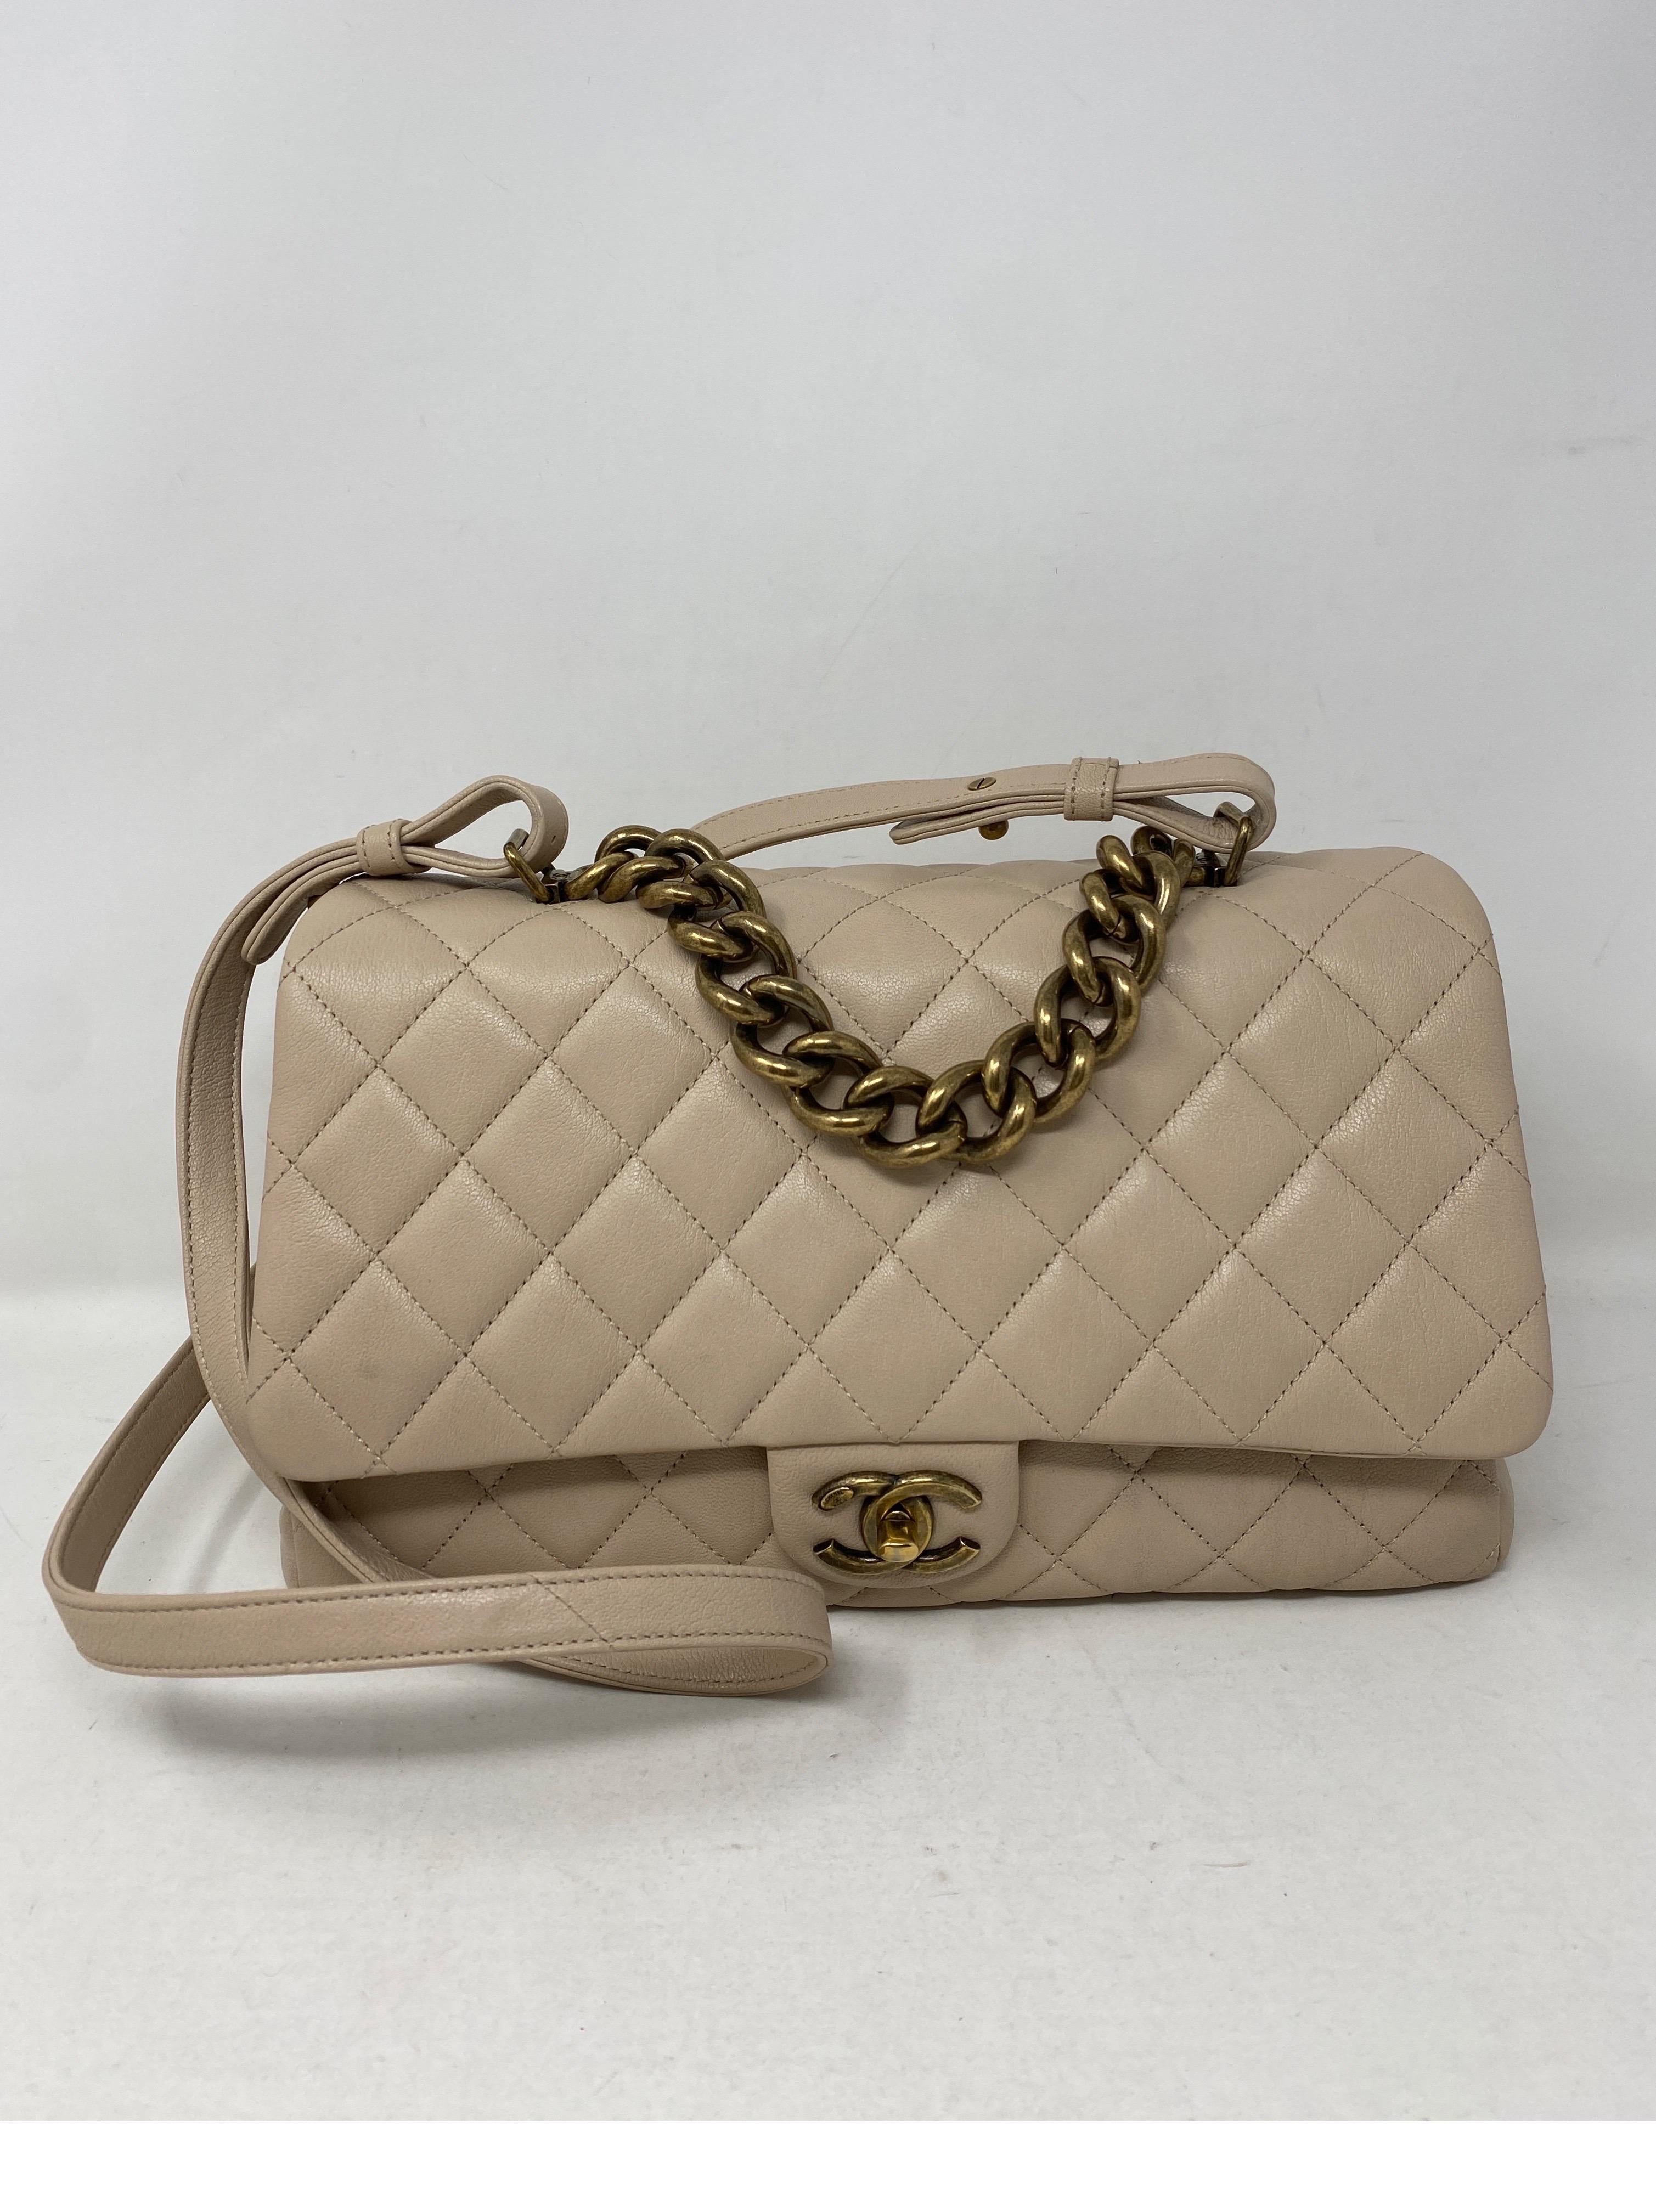 Chanel Cream Leather Trapezio Bag. Antique gold hardware. Cream leather bag. Can be worn crossbody. Excellent like new condition. Inside has three compartments. 12